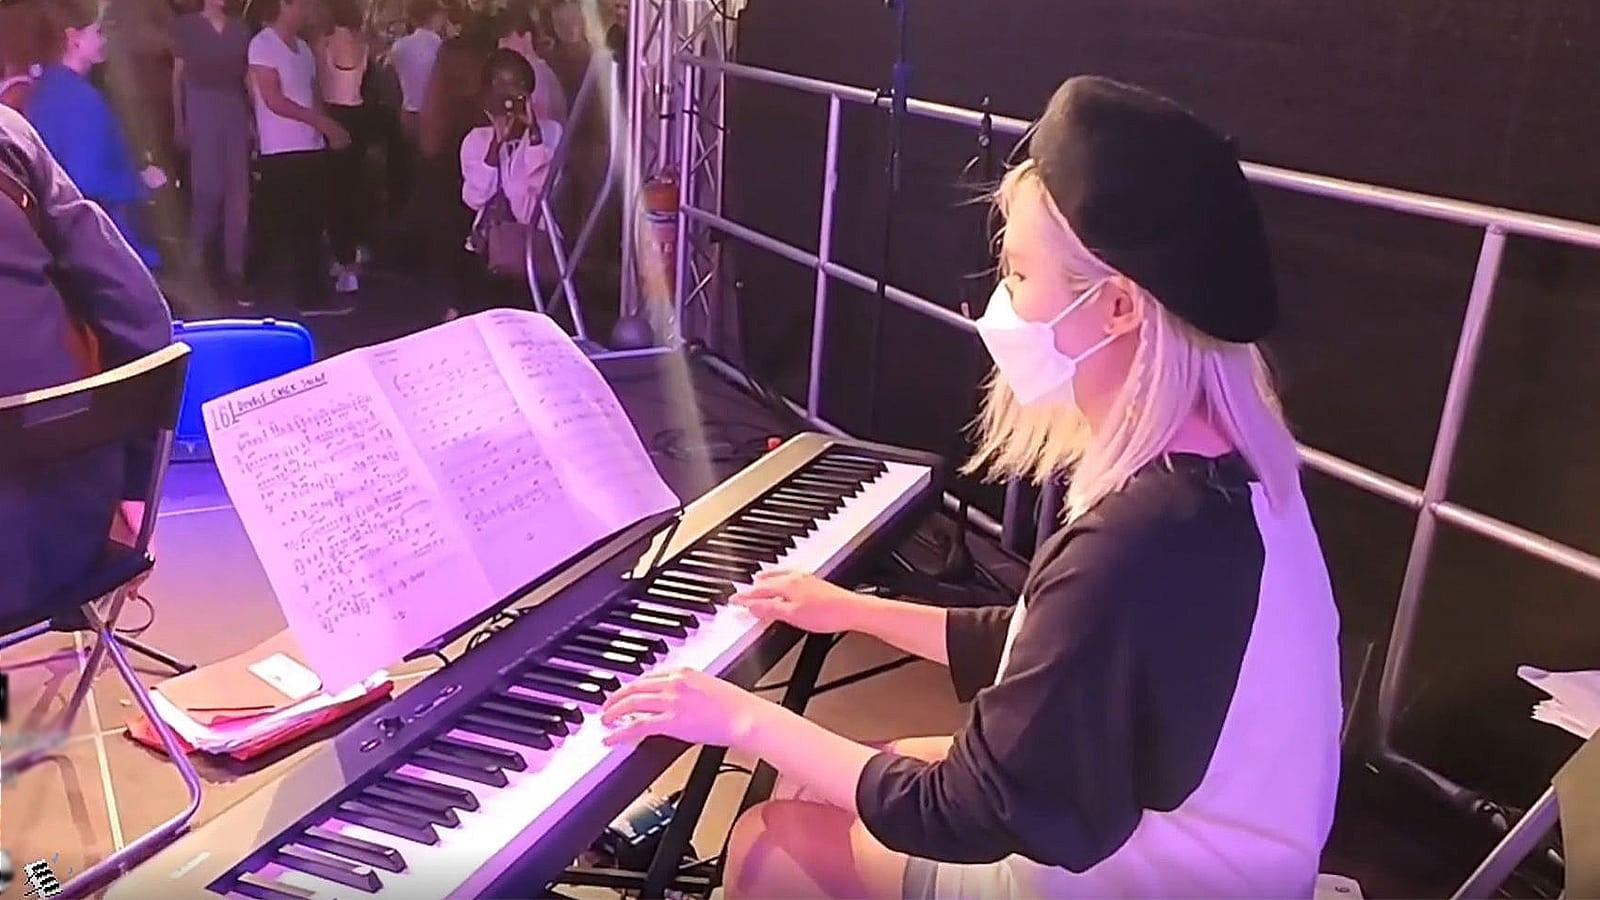 HAchubby stuns crowd with piano skills